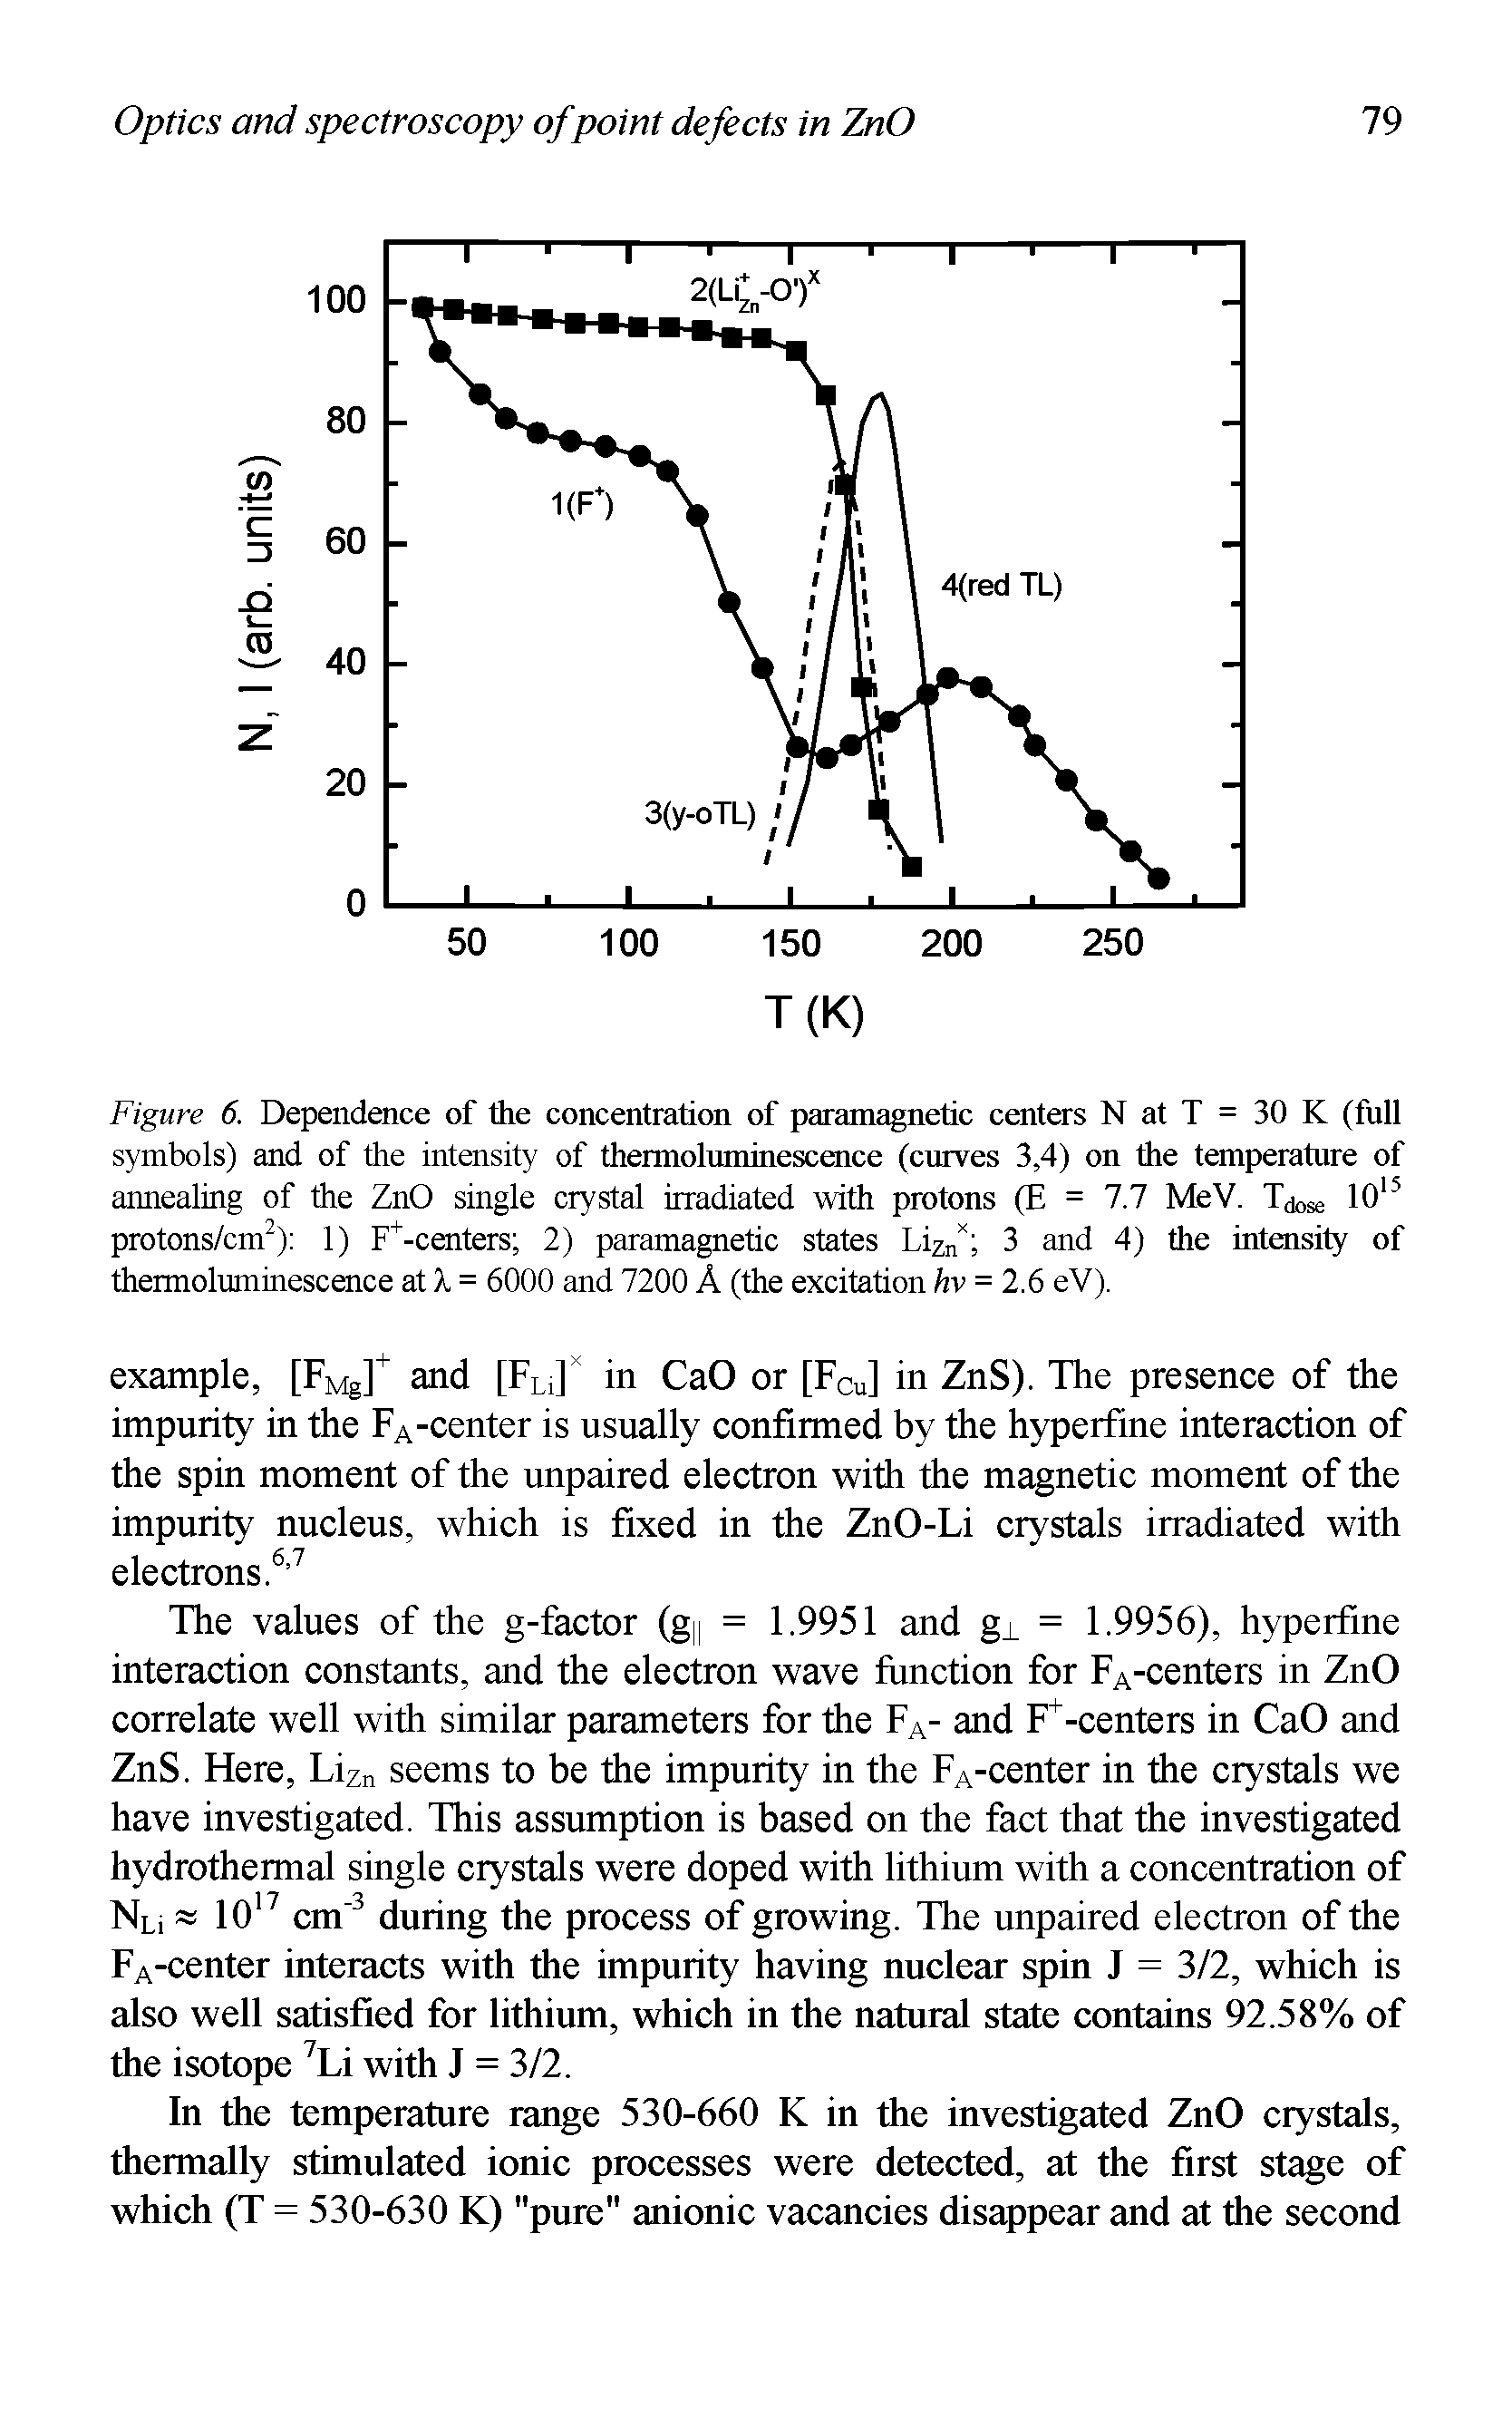 Figure 6. Dependence of the concentration of paramagnetic centers N at T = 30 K (full symbols) and of the intensity of thermoluminescence (curves 3,4) on the temperature of annealing of the ZnO single crystal irradiated with protons (E = 7.7 MeV. Tjose lO protons/cm ) 1) F -centers 2) paramagnetic states Lizn" 3 and 4) the intensity of thermoluminescence at A, = 6000 and 7200 A (the excitation hv = 2.6 eV).